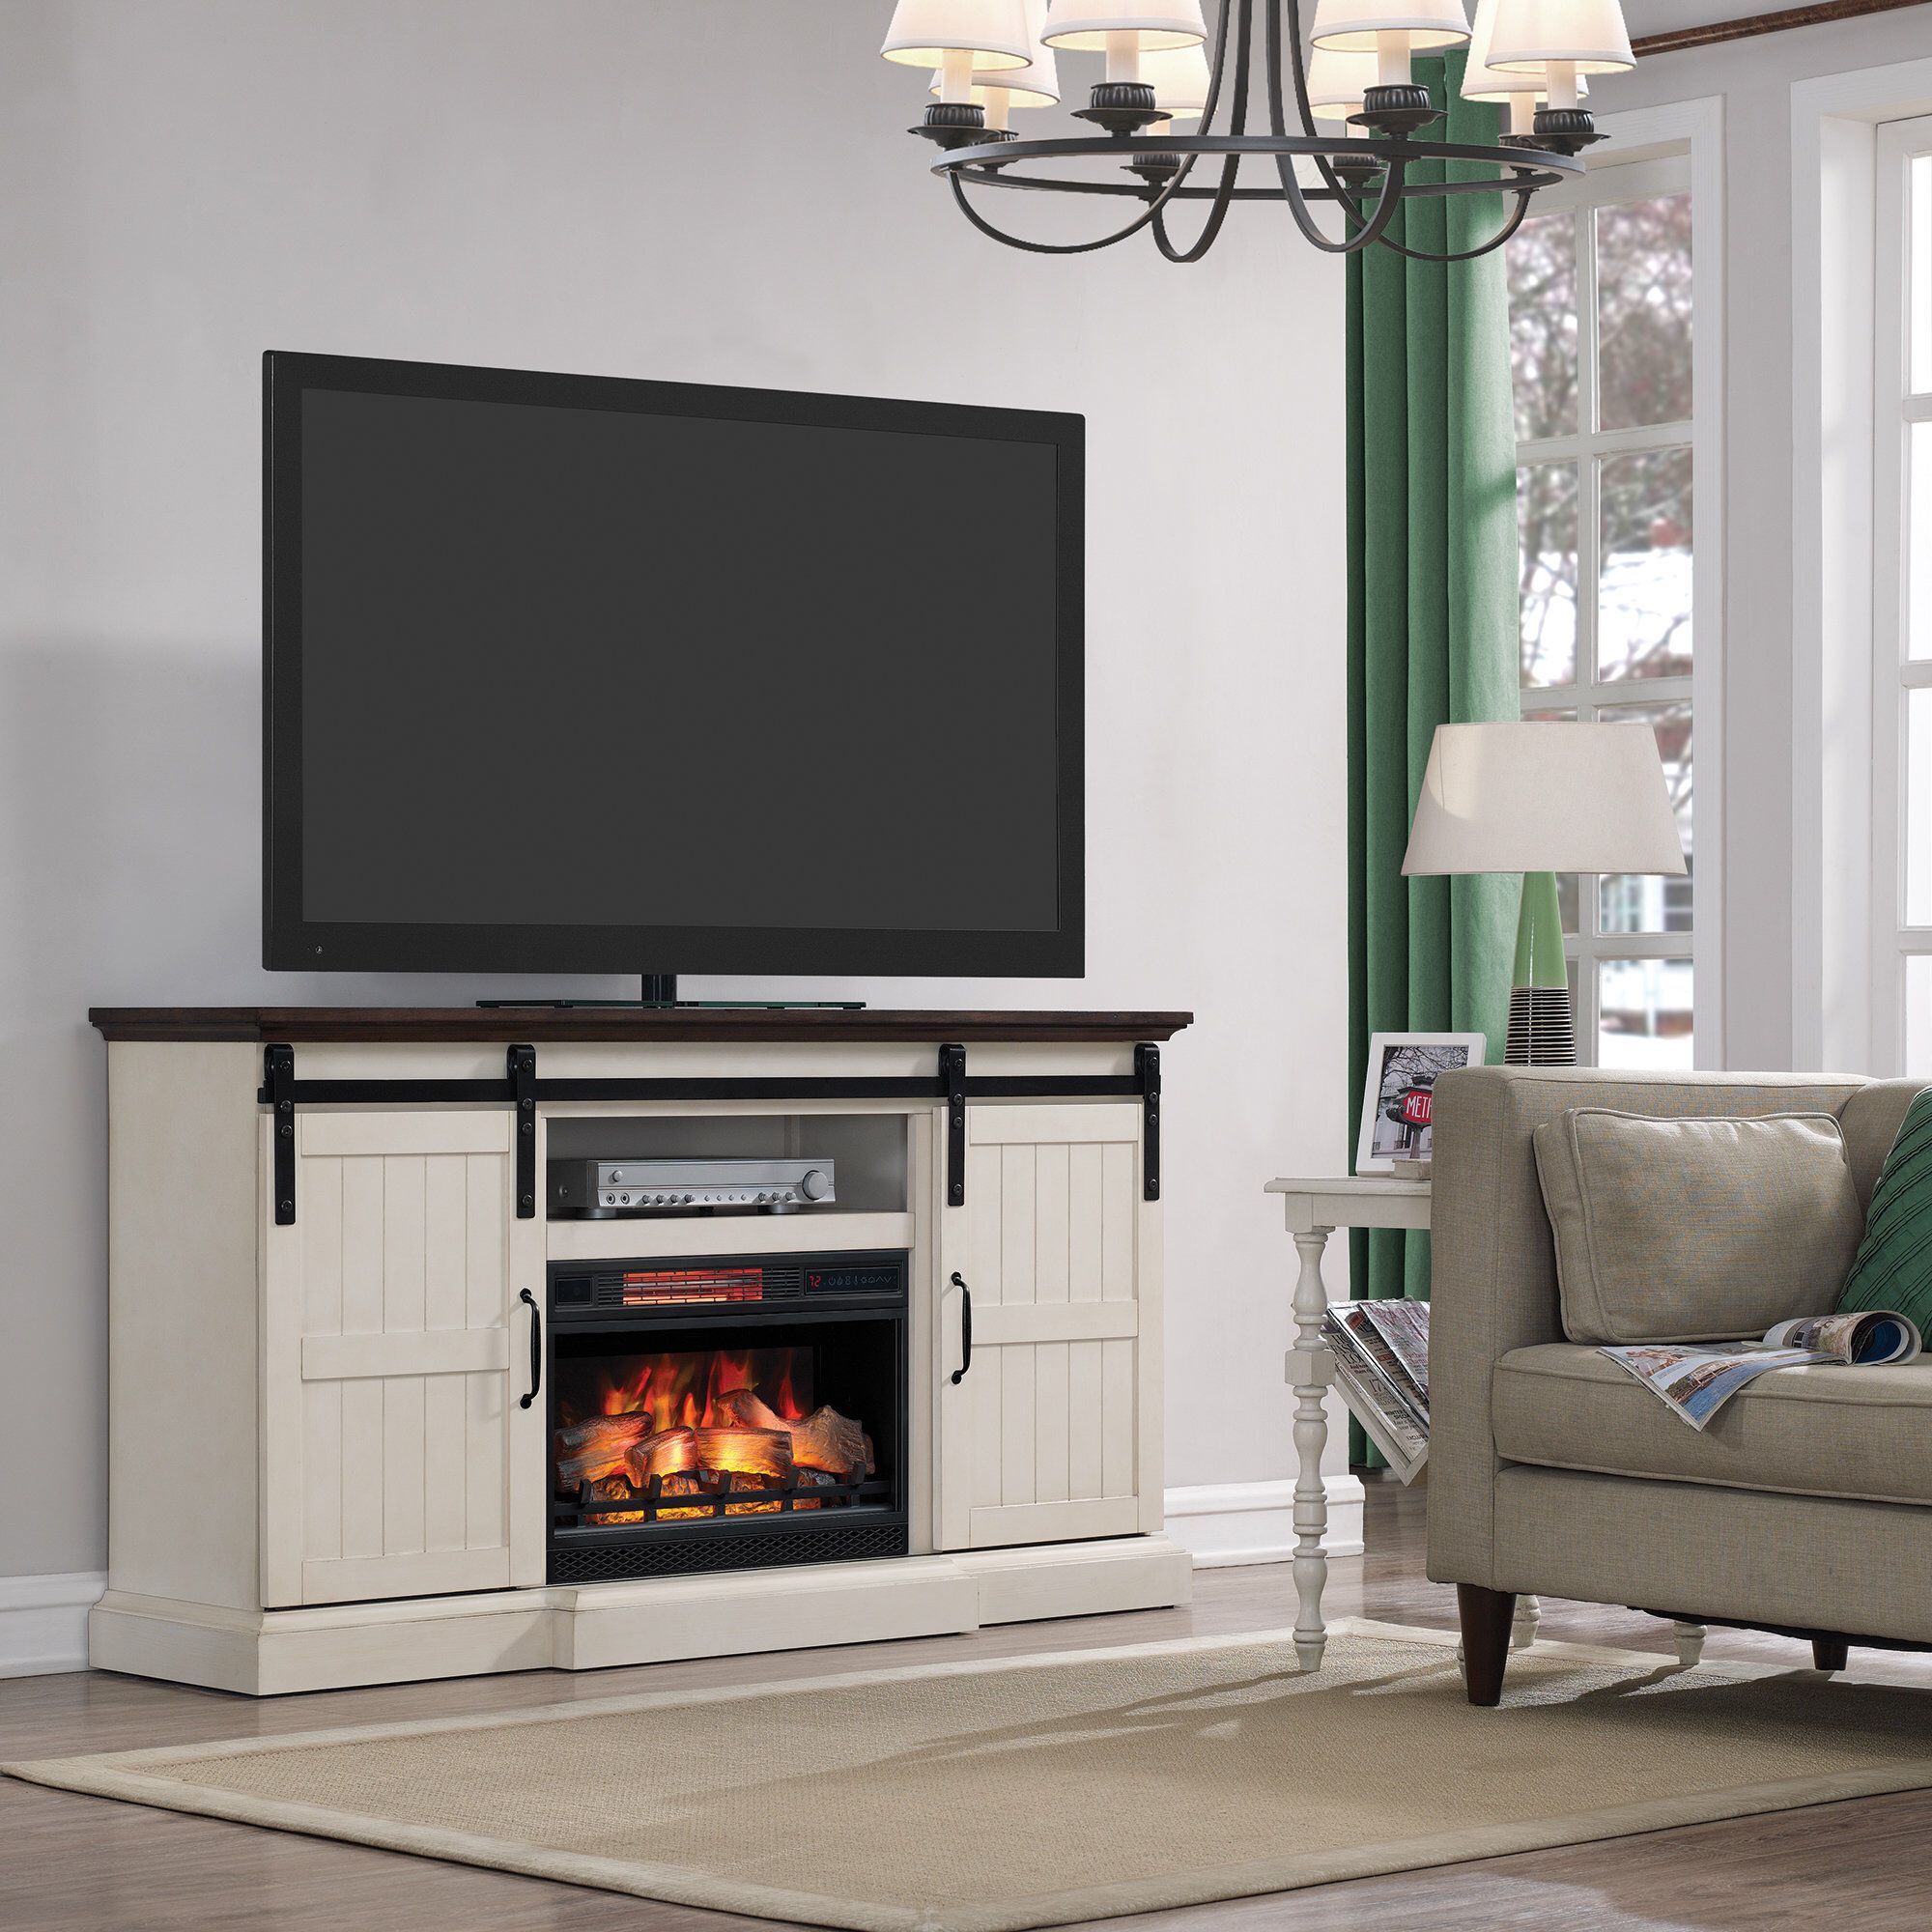 Fireplace Media Stand Elegant Glendora 66 5" Tv Stand with Electric Fireplace